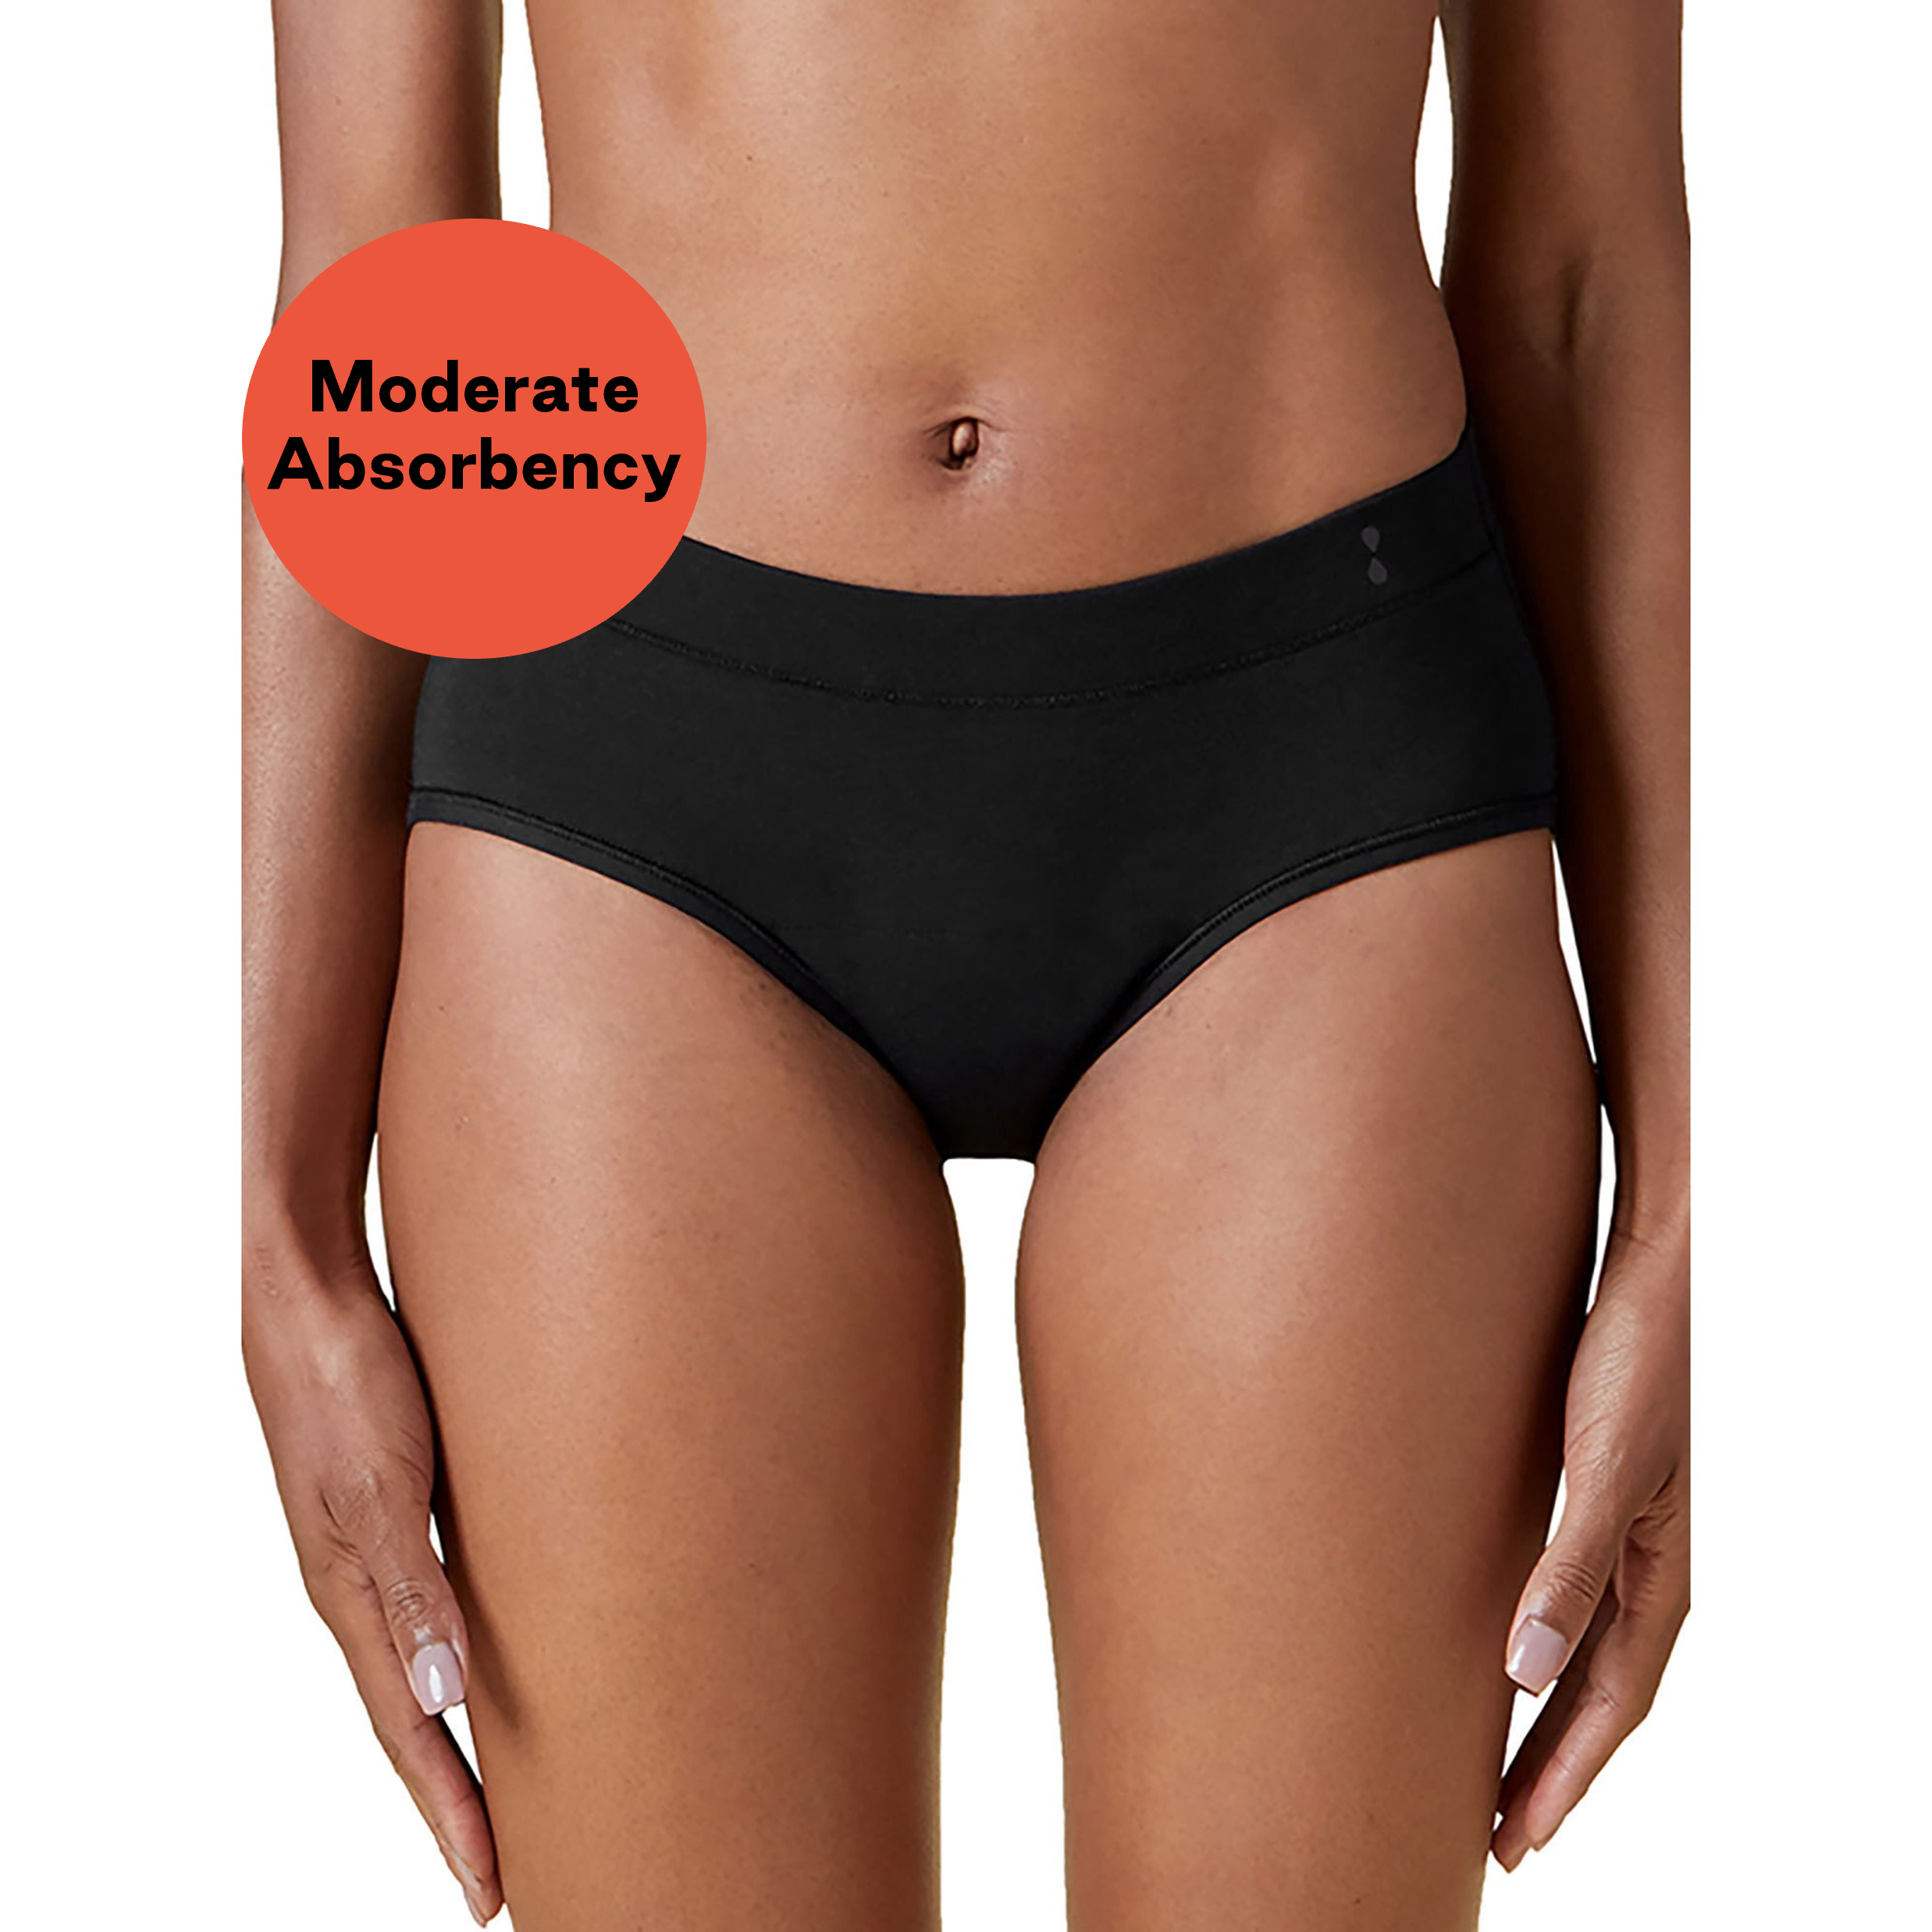 Thinx for All™ Women's Briefs Period Underwear, Moderate Absorbency, Black - image 1 of 5